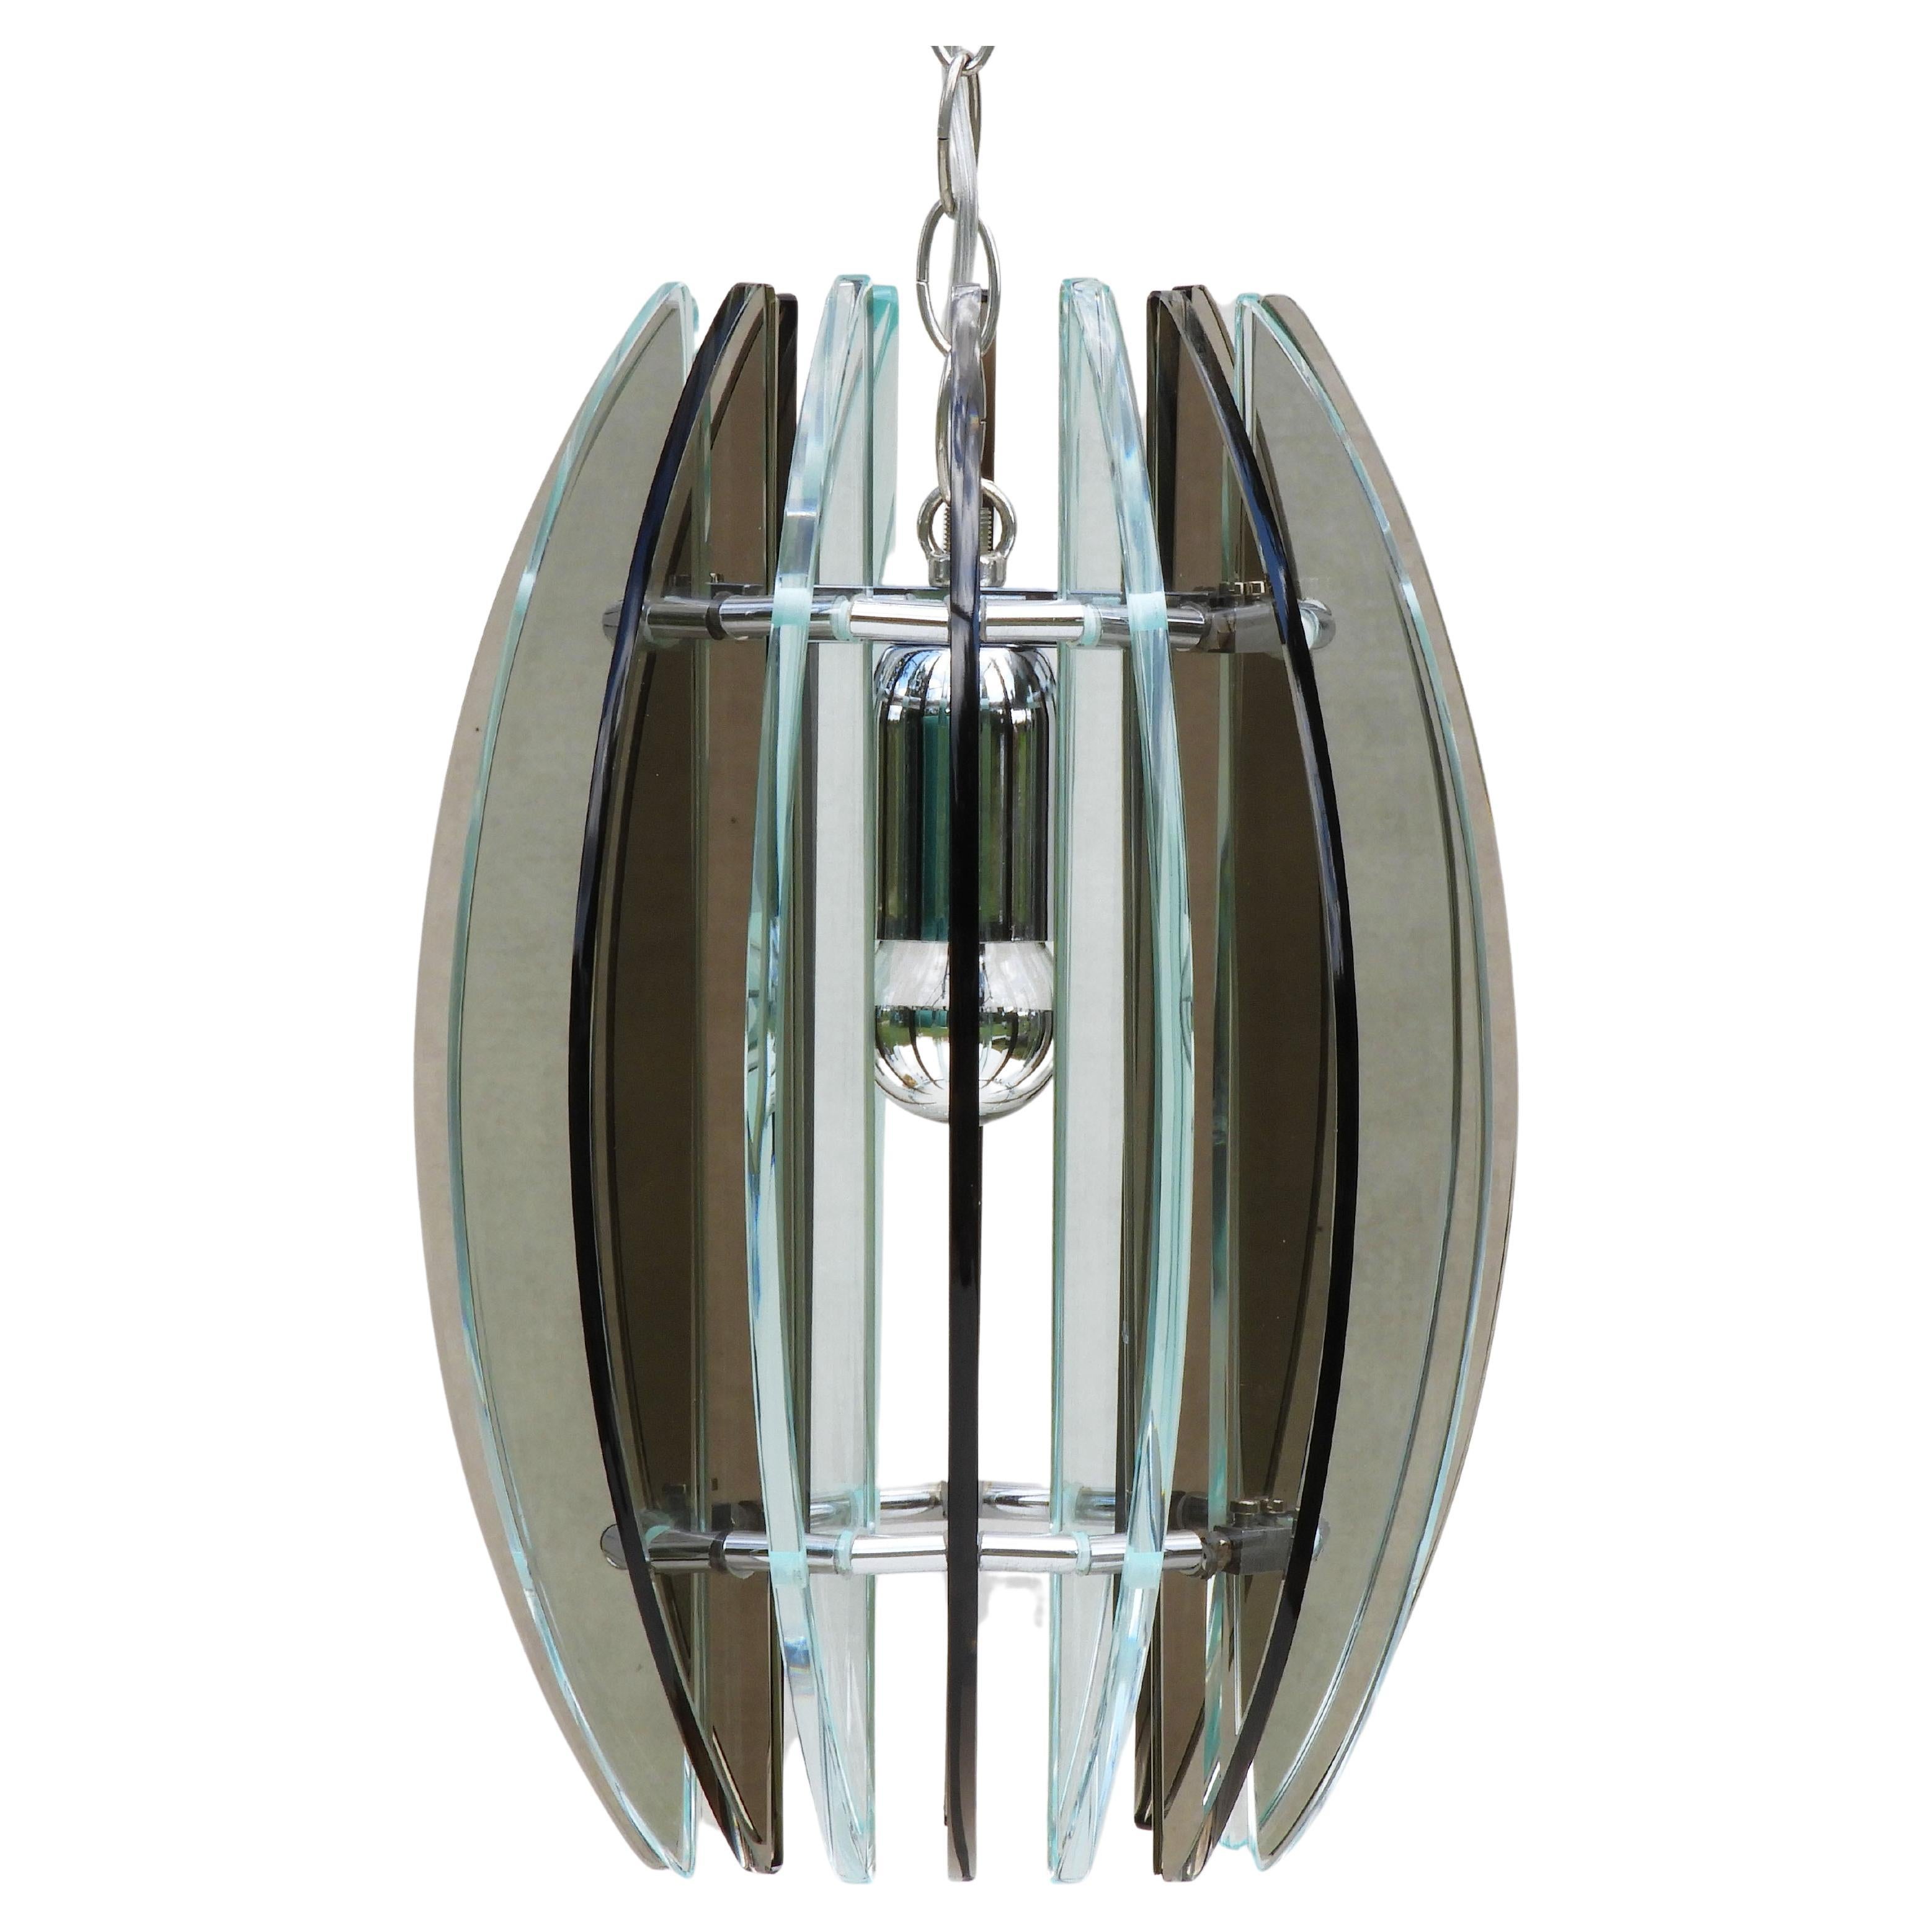 Veca glass pendant light, Mid-Century Italy, C1970
Iconic Mid-century ceiling light from Italian lighting manufacturer Veca.
Sixteen alternating, smoked black and transparent glass, crescents in circular form on a chromed frame structure.
In very